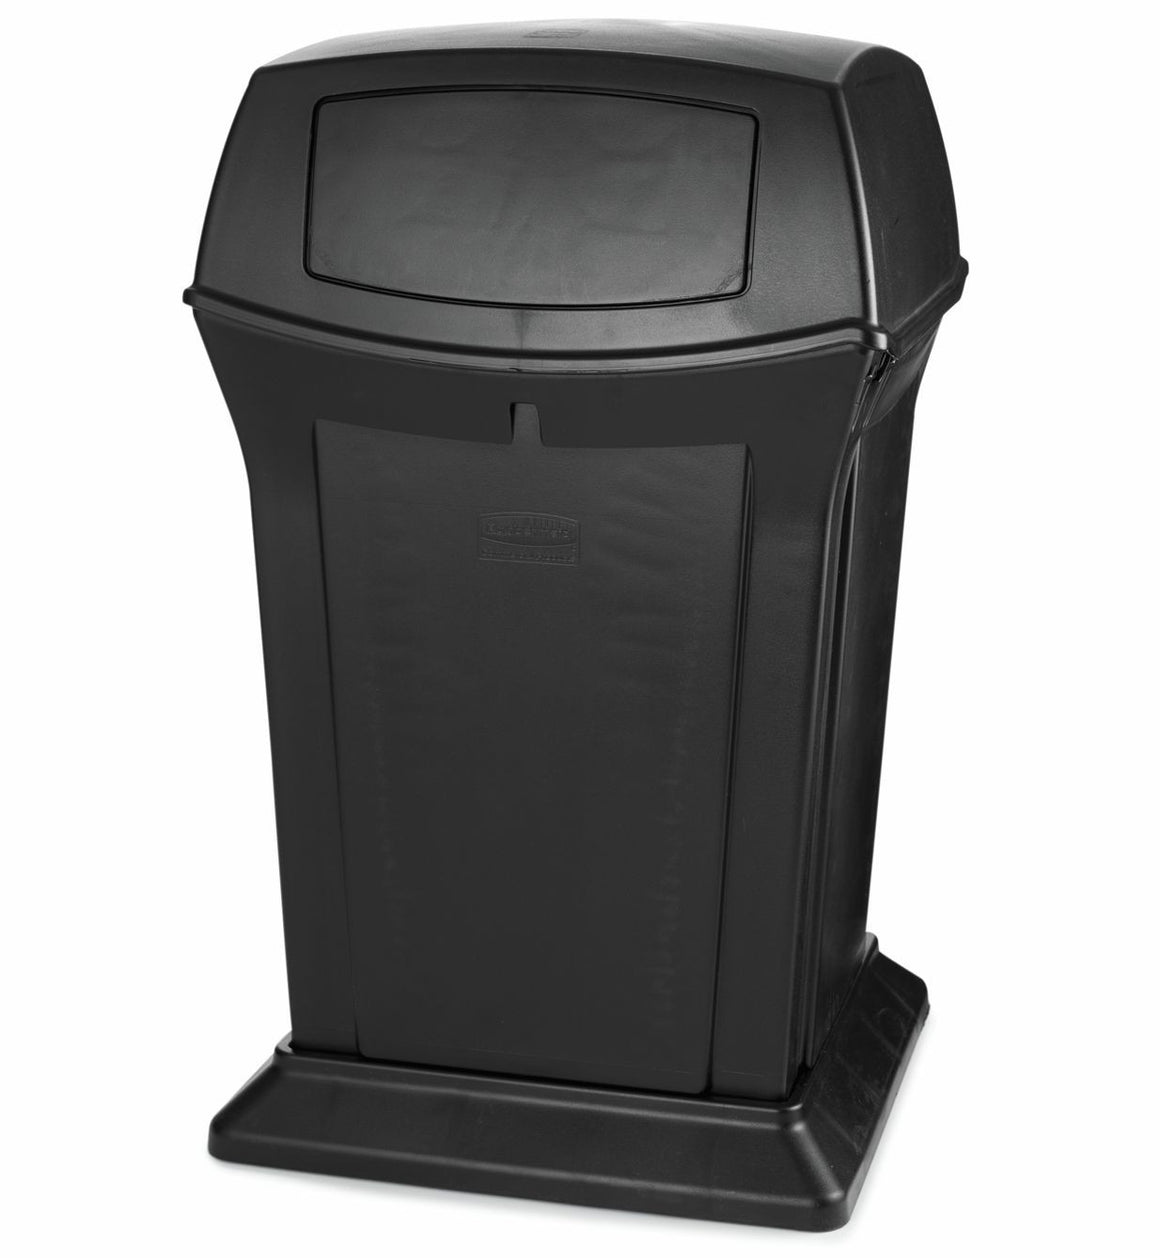 45gal RANGER CONTAINER W/2-DOORS 24.88"Sqx41.5"H